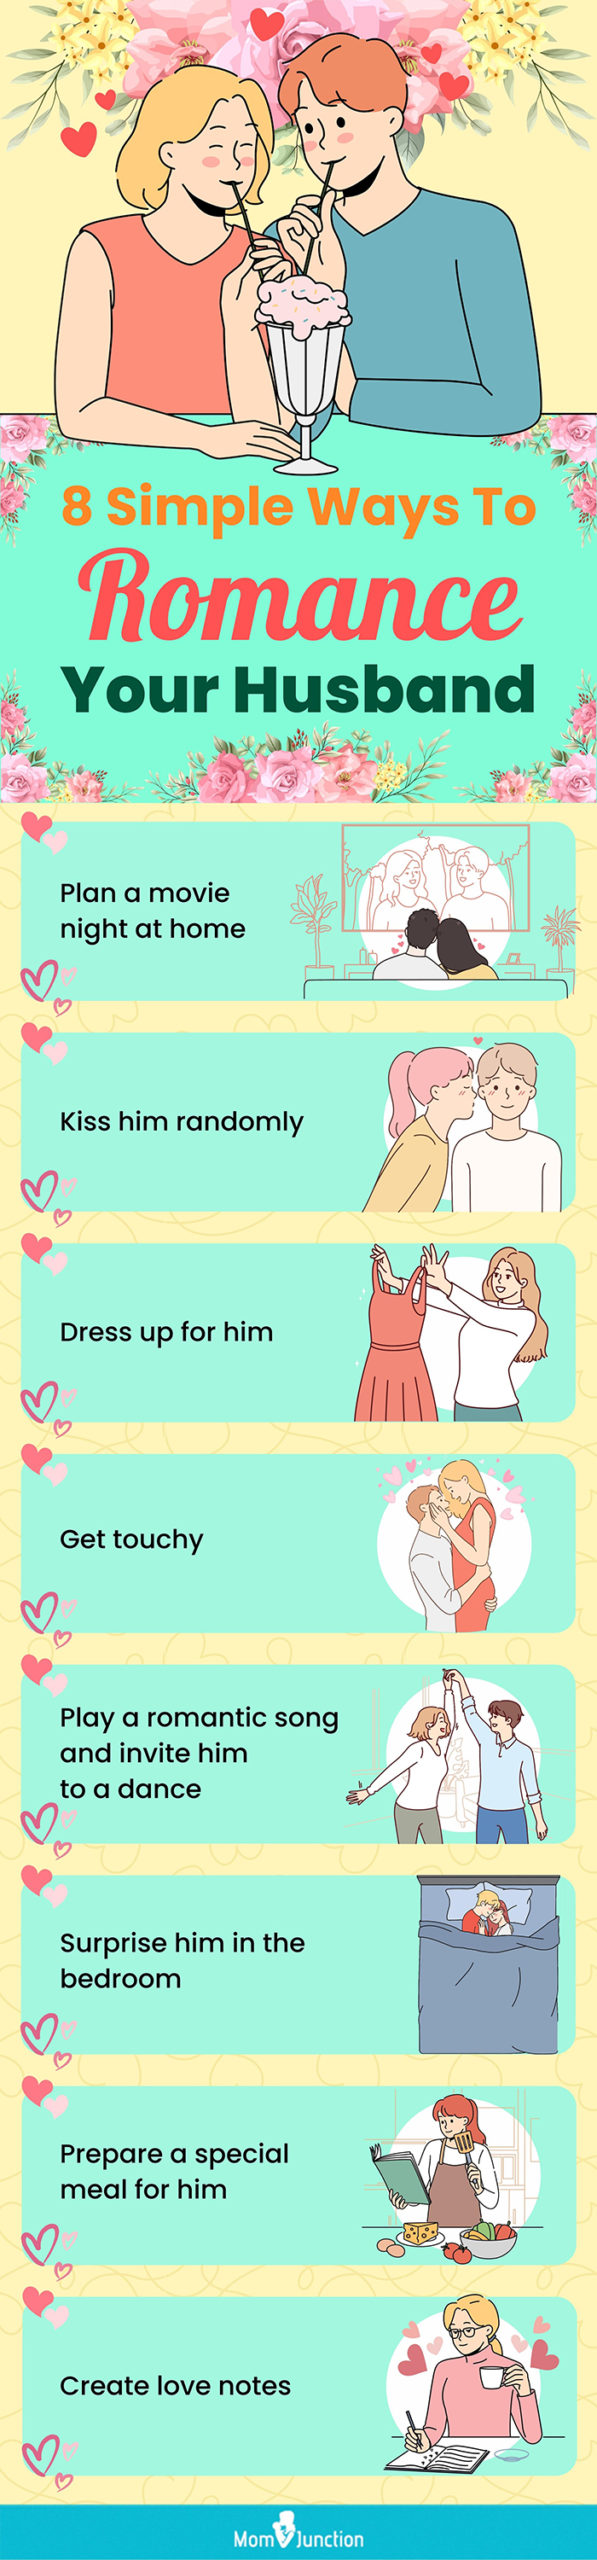 8 simple ways to romance your husband (infographic)